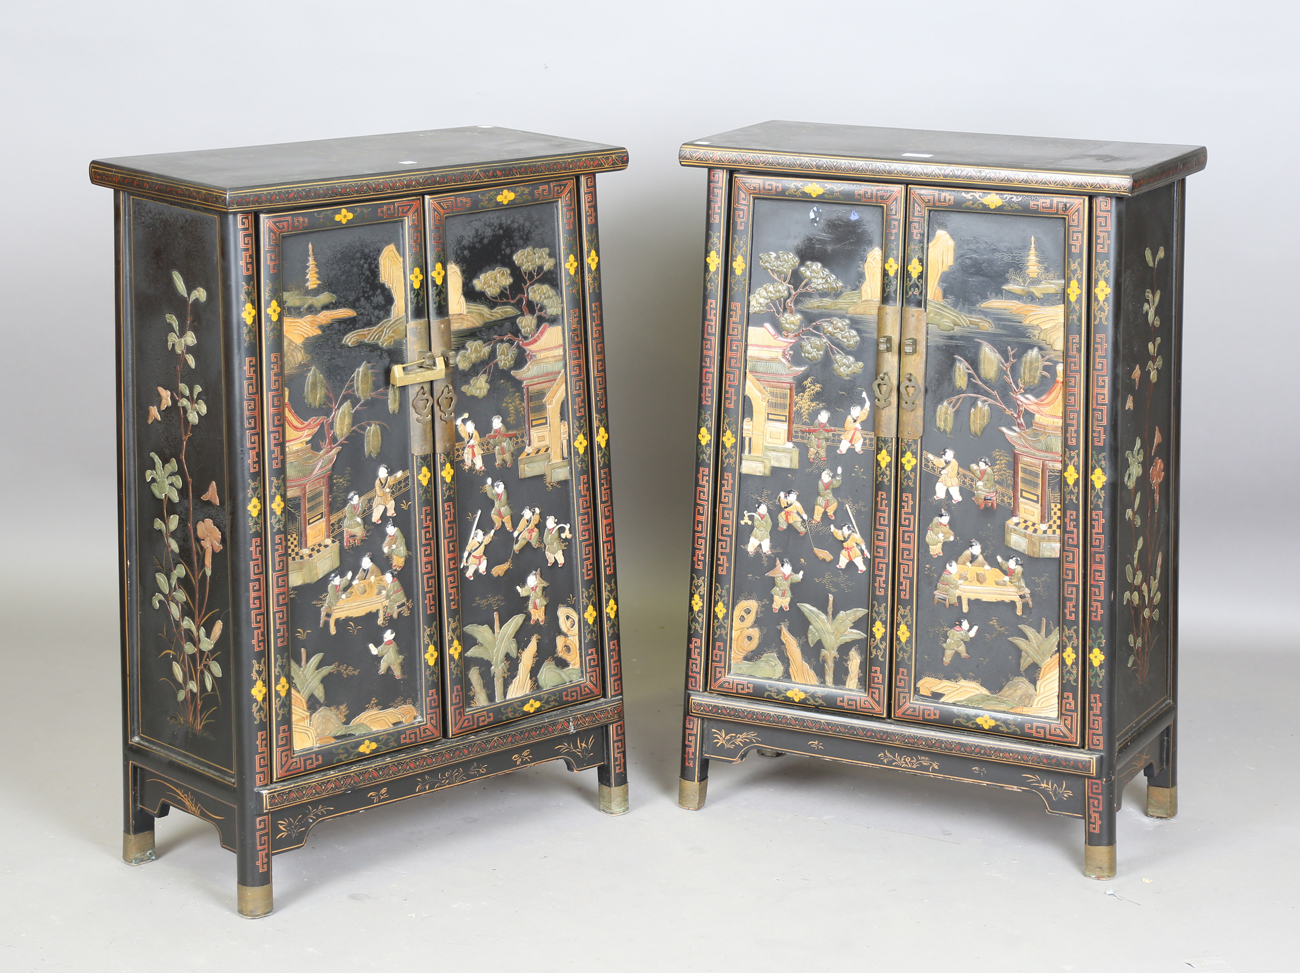 A pair of 20th century Chinese black lacquered and hardstone inlaid side cabinets, each door